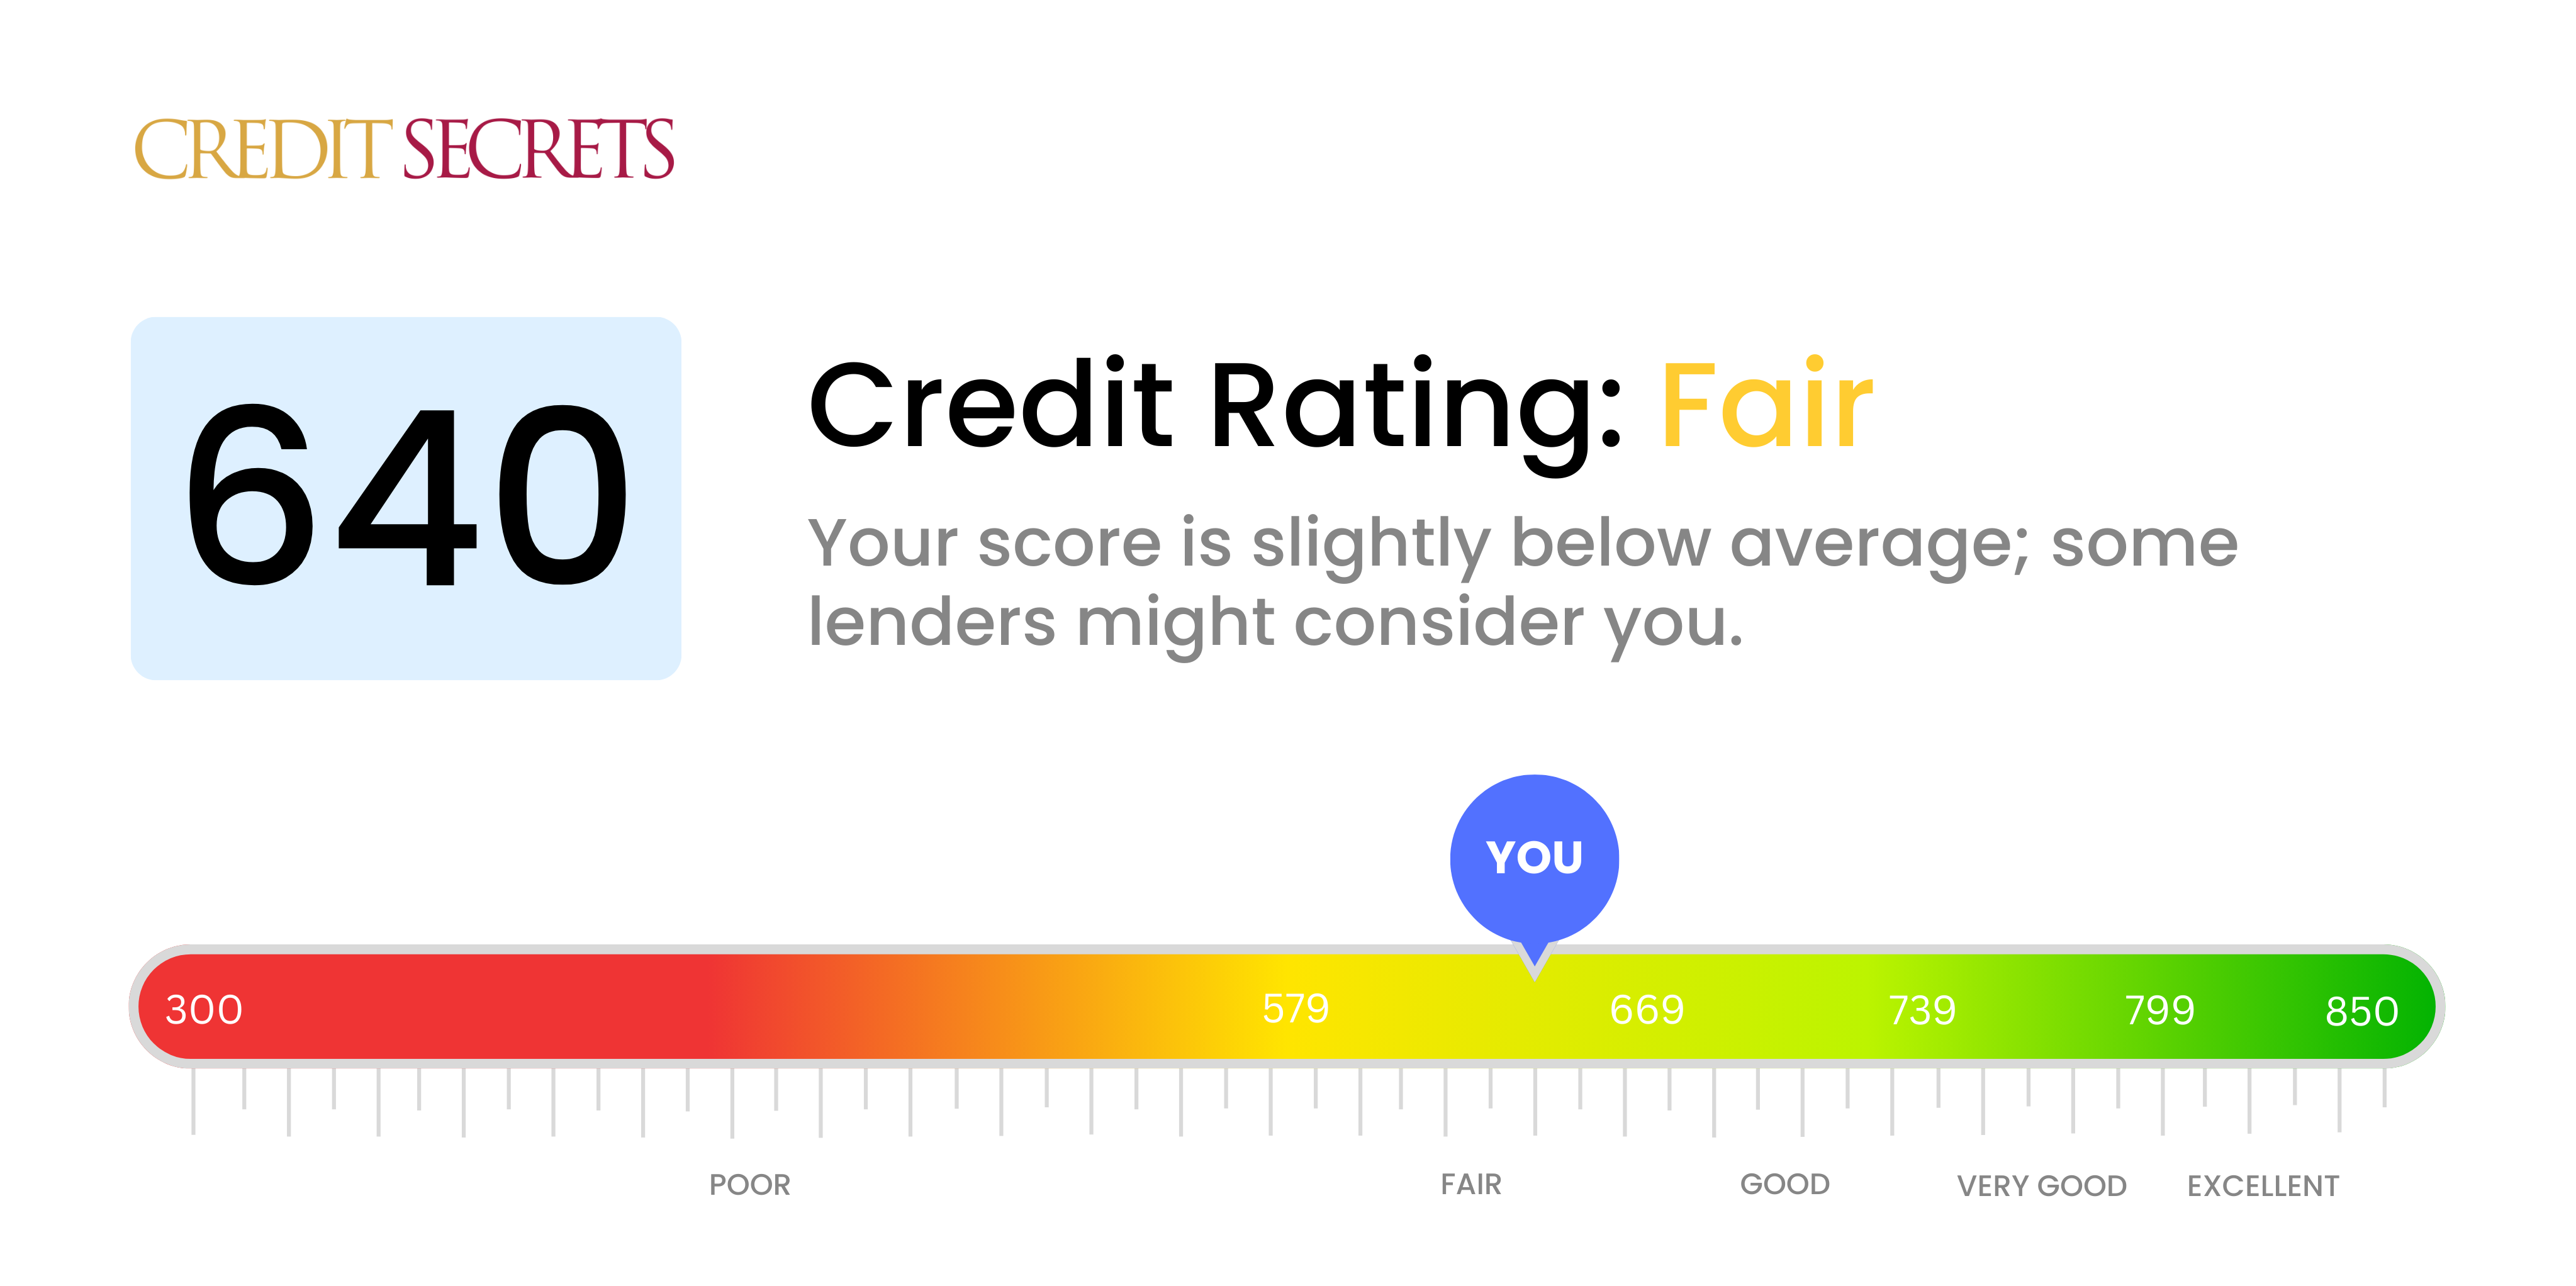 Is 640 a good credit score?